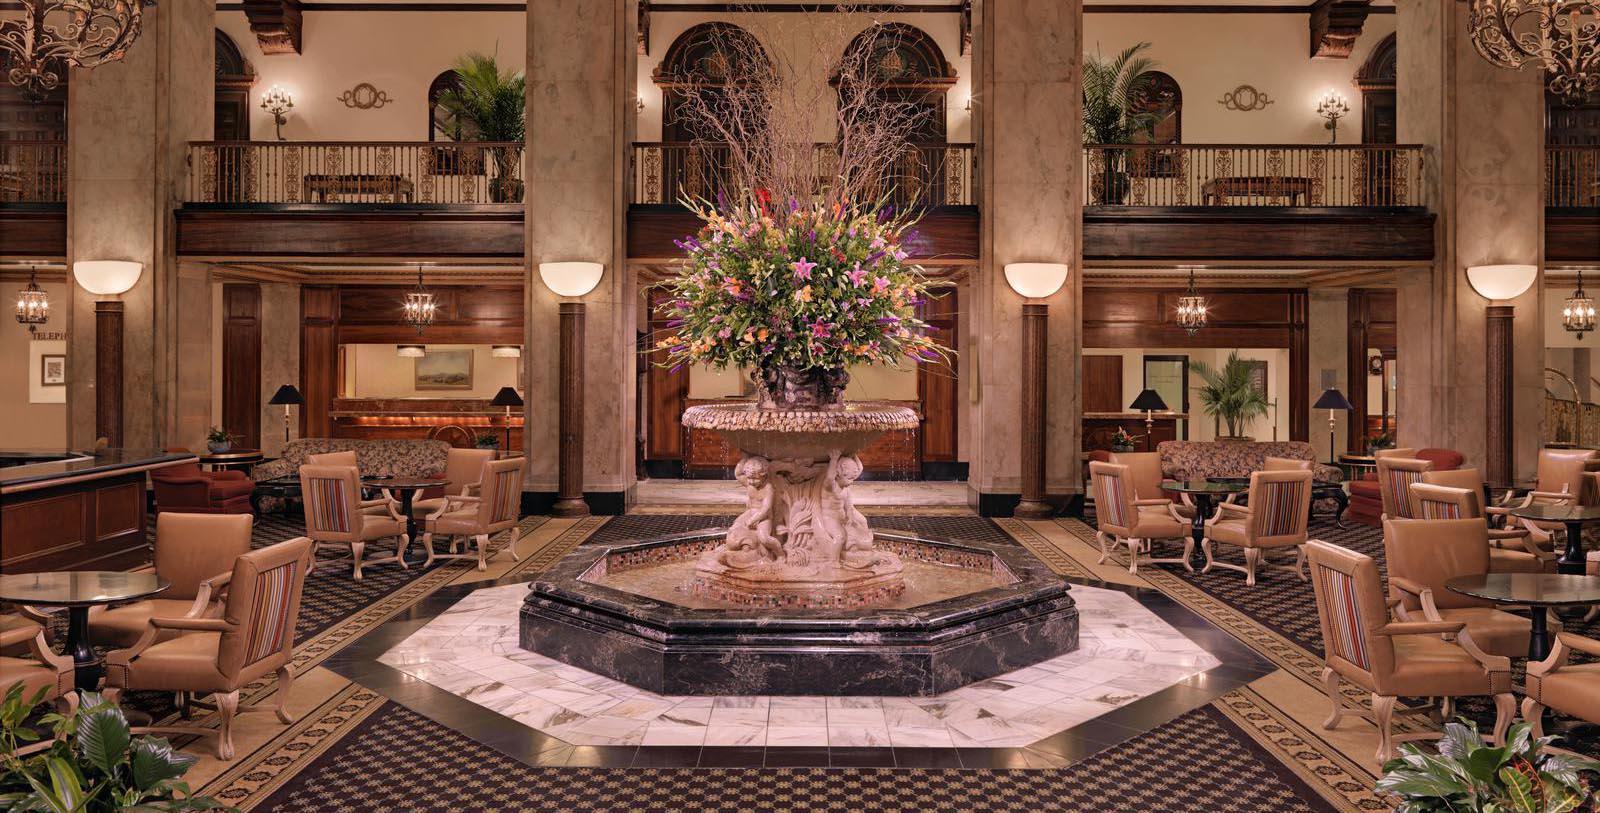 Image of the Lobby, The Peabody Memphis, 1869, Member of Historic Hotels of America, in Memphis, Tennessee